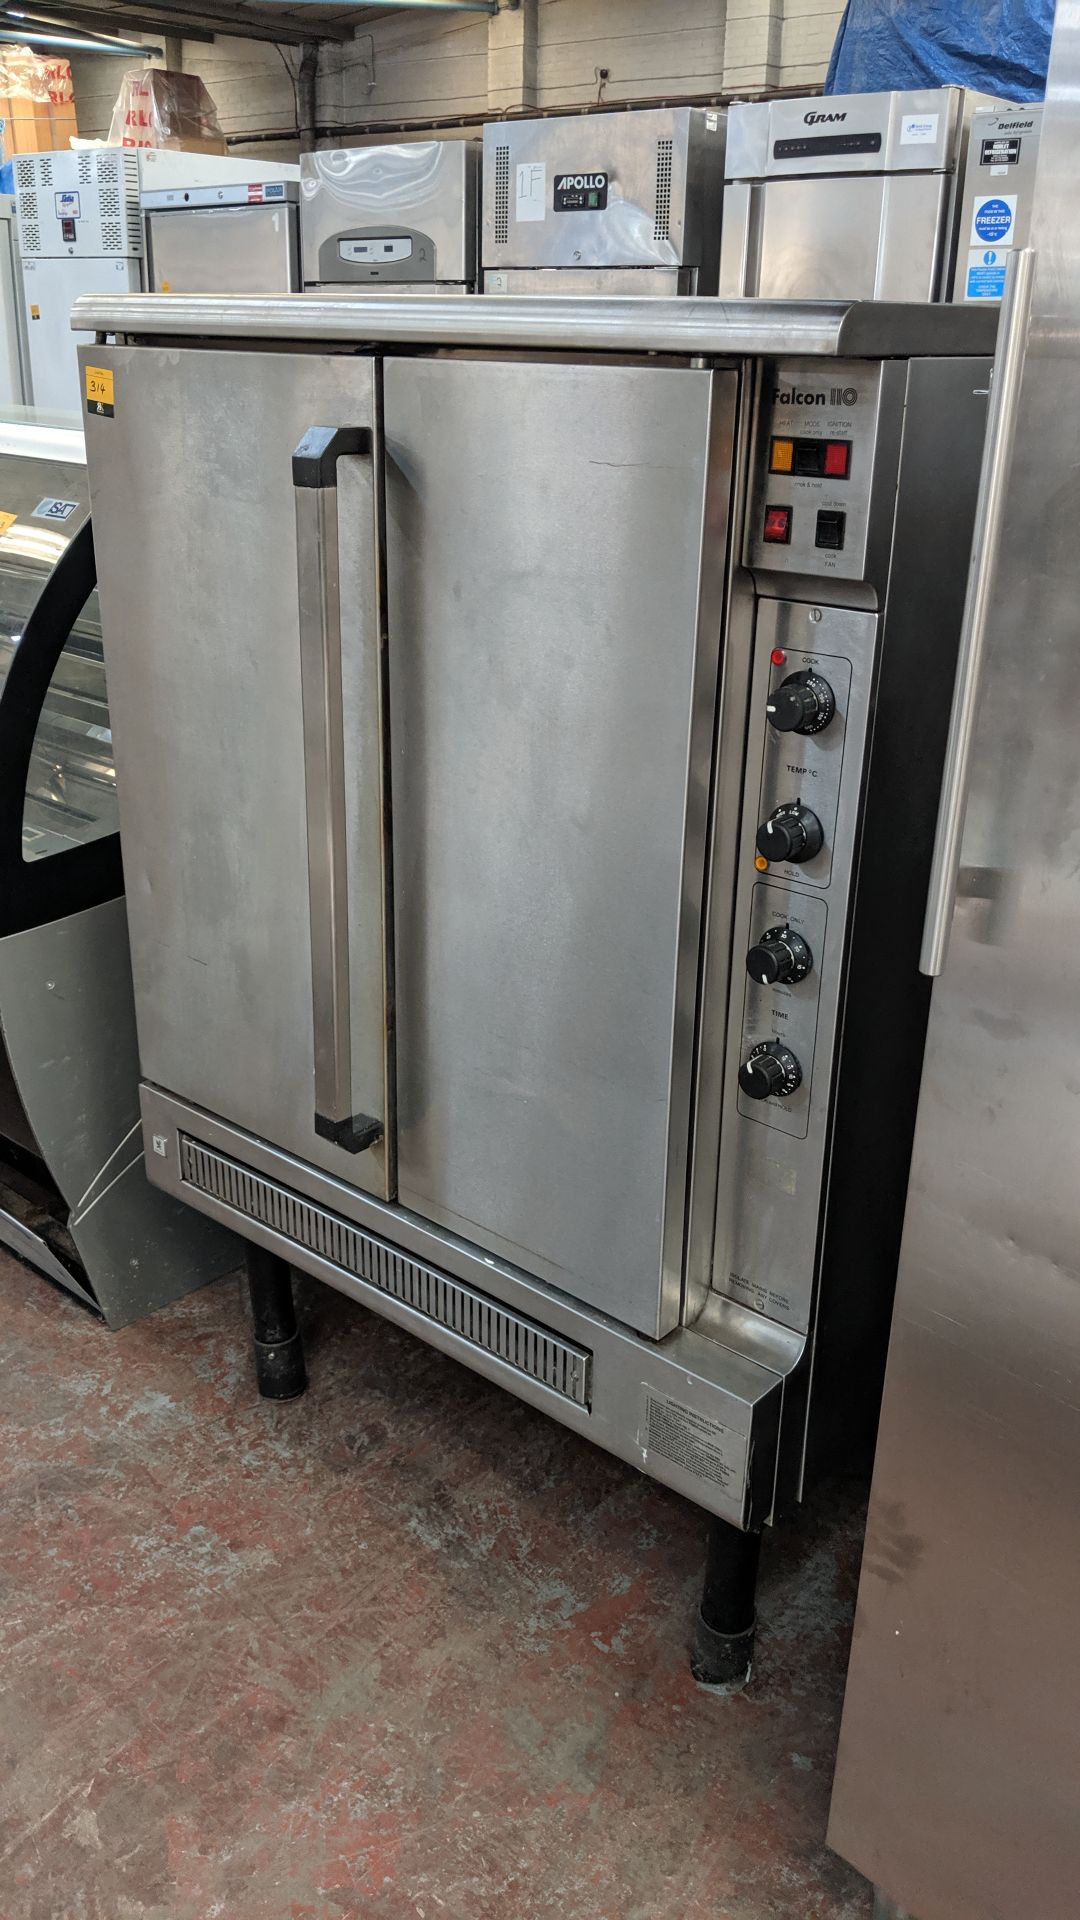 Falcon wide 10 rack oven IMPORTANT: Please remember goods successfully bid upon must be paid for and